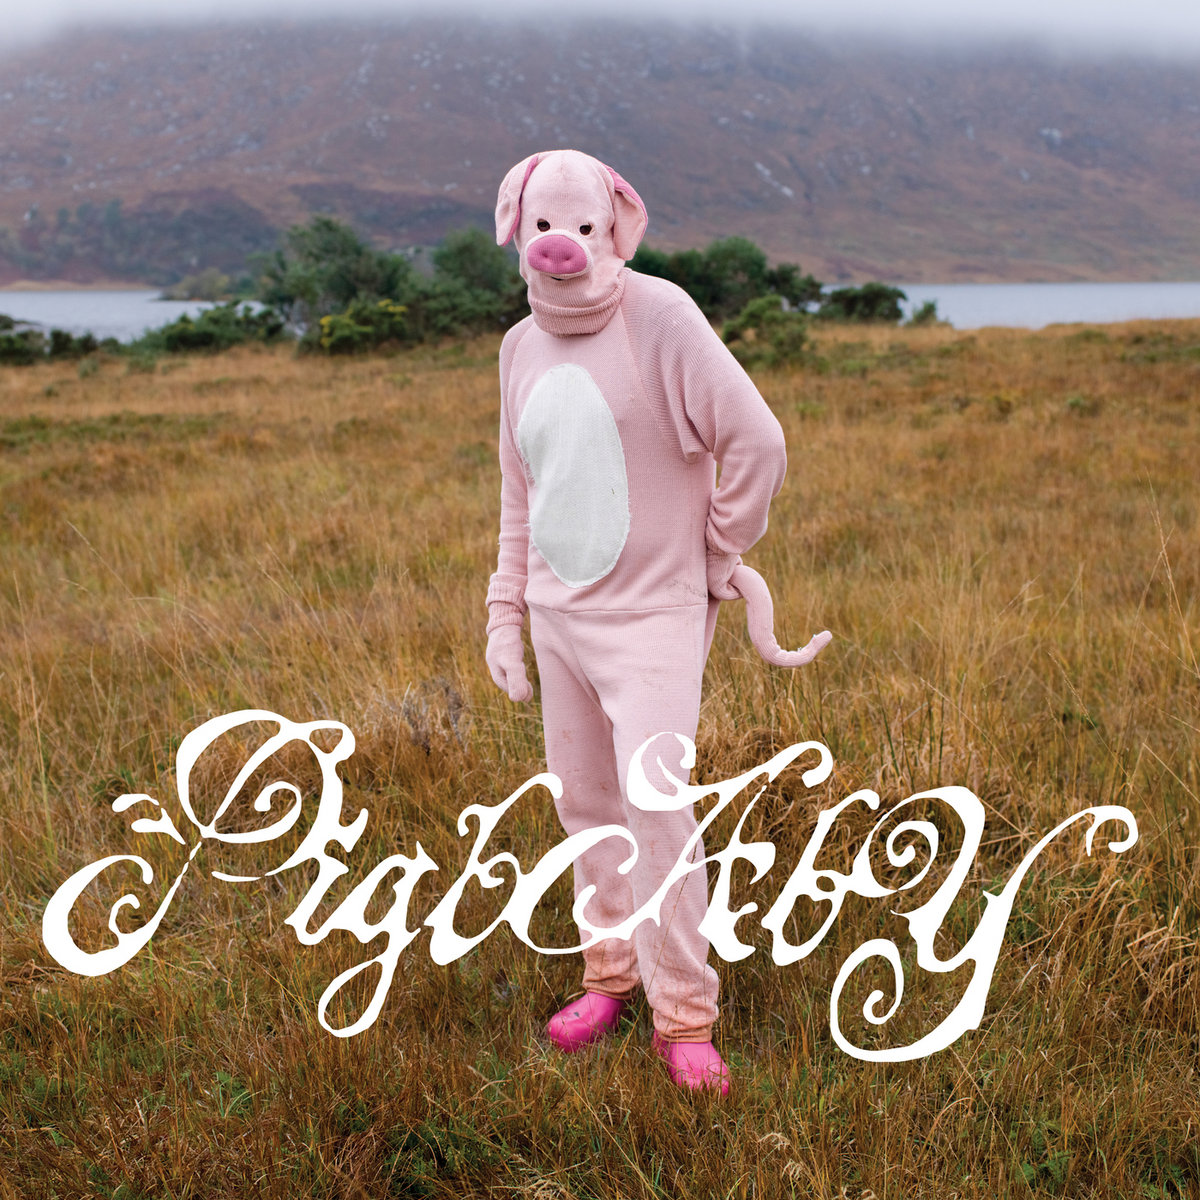 #Nowplaying #pigbaby - Life Moves Fast, so Take My Hand @PLZMakeItRuins #pacificnotions